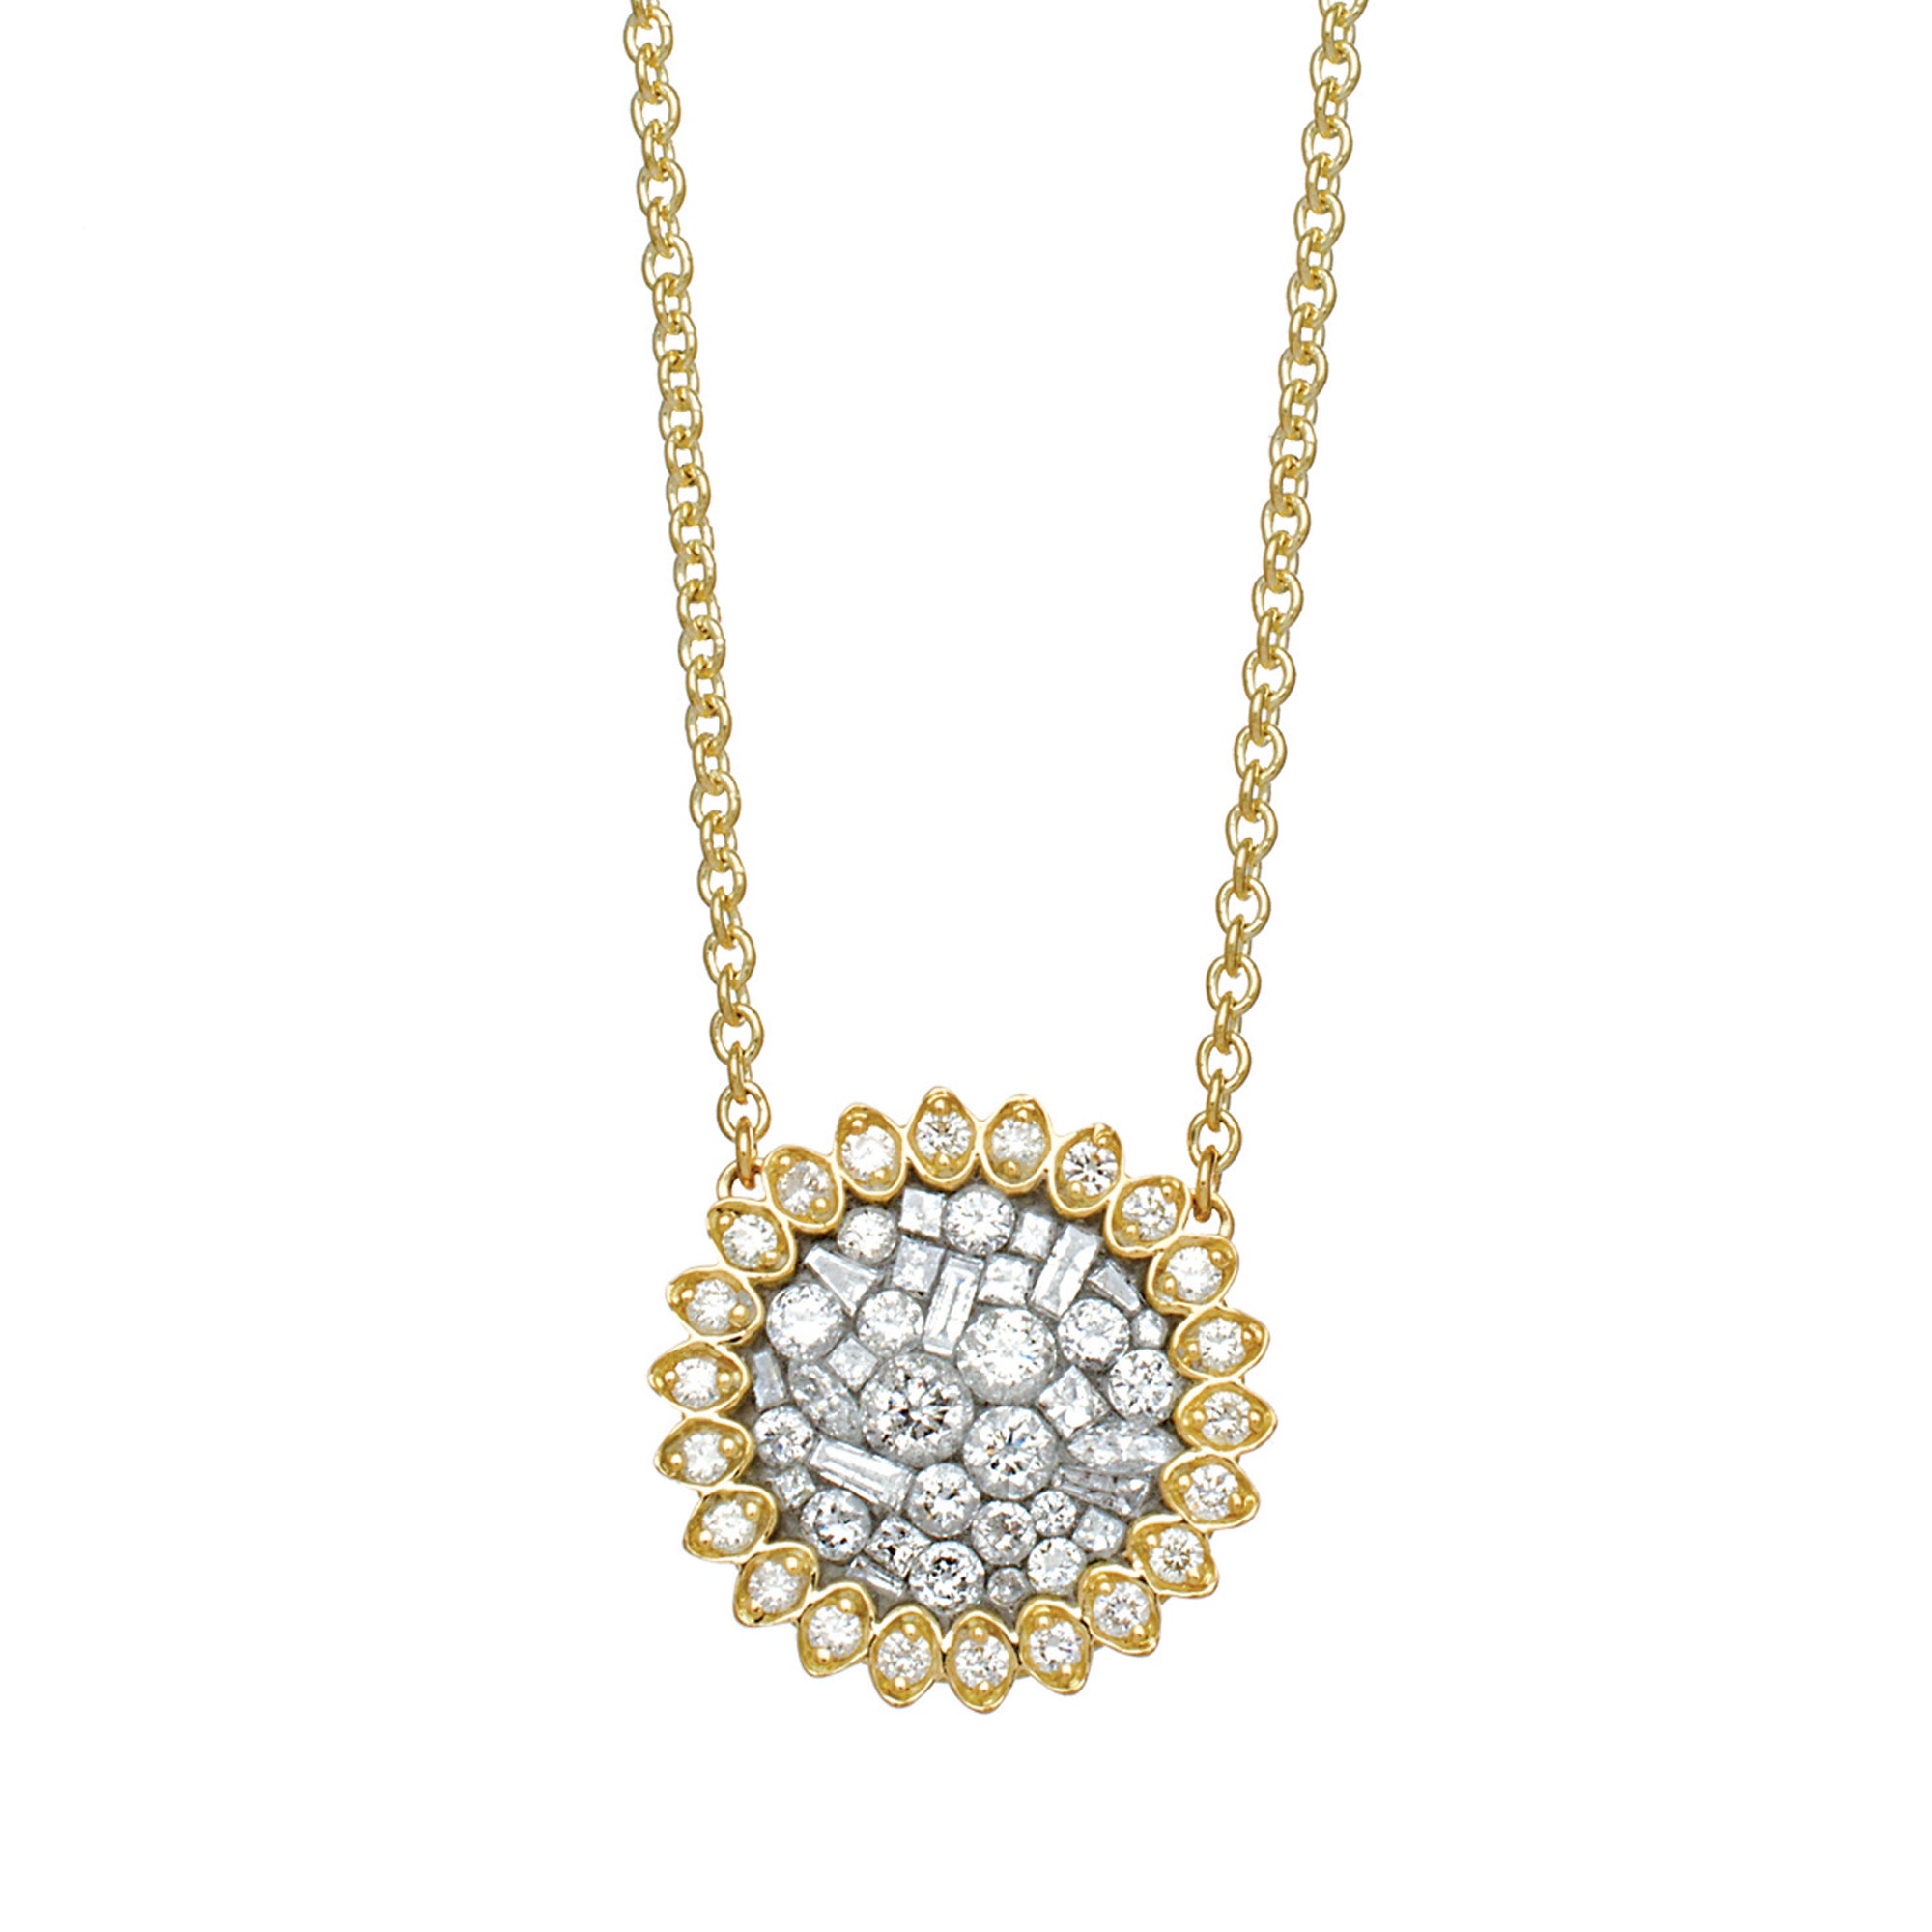 Ice Sunflower Diamond Necklace by Pleve available at Talisman Collection Fine Jewelers in El Dorado Hills, CA and online. Specs: 1.10 cttw diamonds, 18k yellow gold.